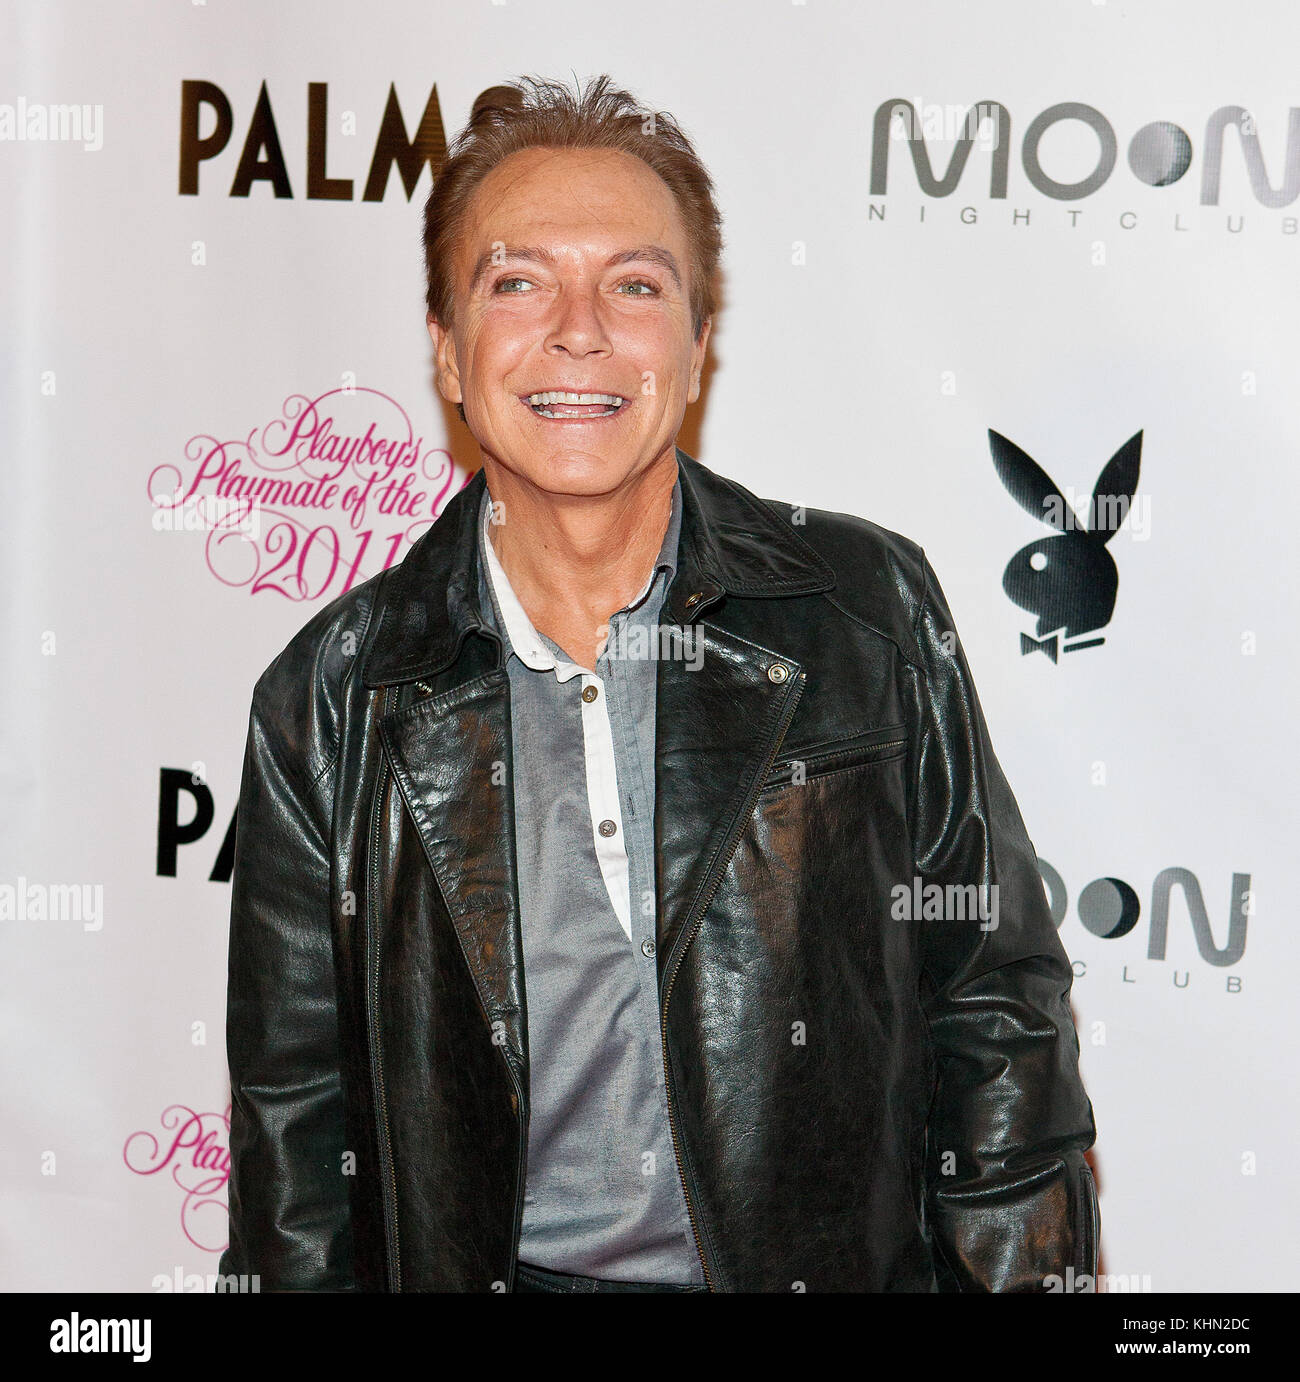 David Cassidy pictured at Playboy Playmate of The Year Announcement Ceremony at MOON Nightclub at Palms Casino Resort in Las Vegas, NV on May 6, 2011. Miss October 2010 was named 2011 Playboy Playmate of The Year by Hugh Hefner. © Kabik/MediaPunch***HOUSE COVERAGE*** Stock Photo